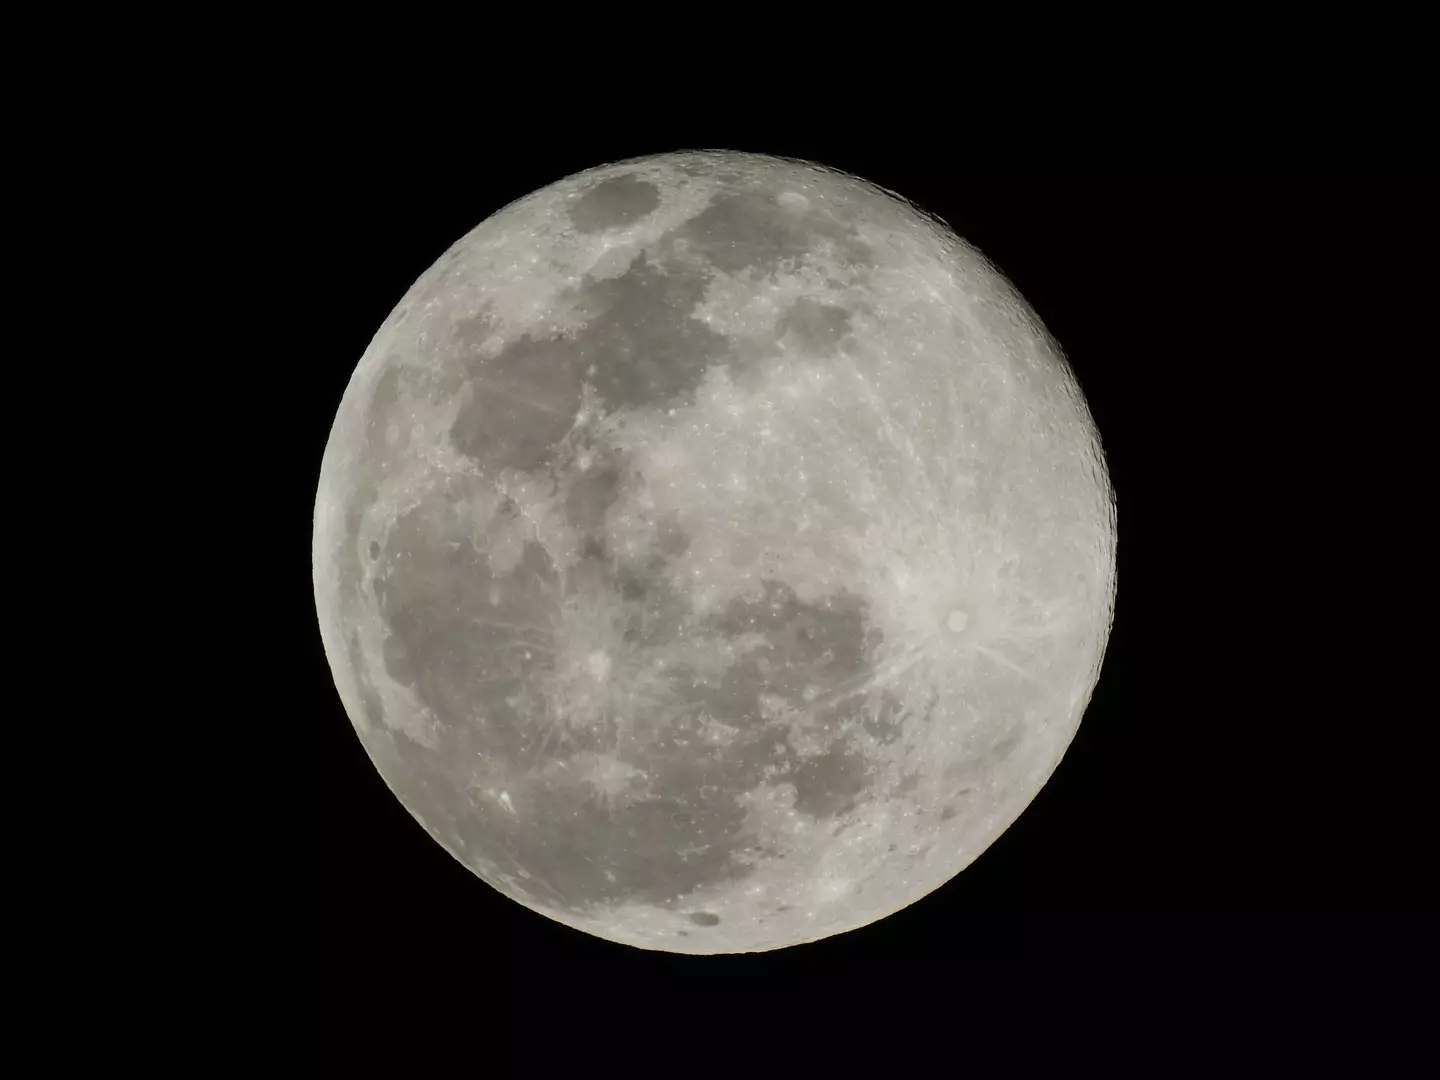 The supermoons will happen within 29 days of each other.